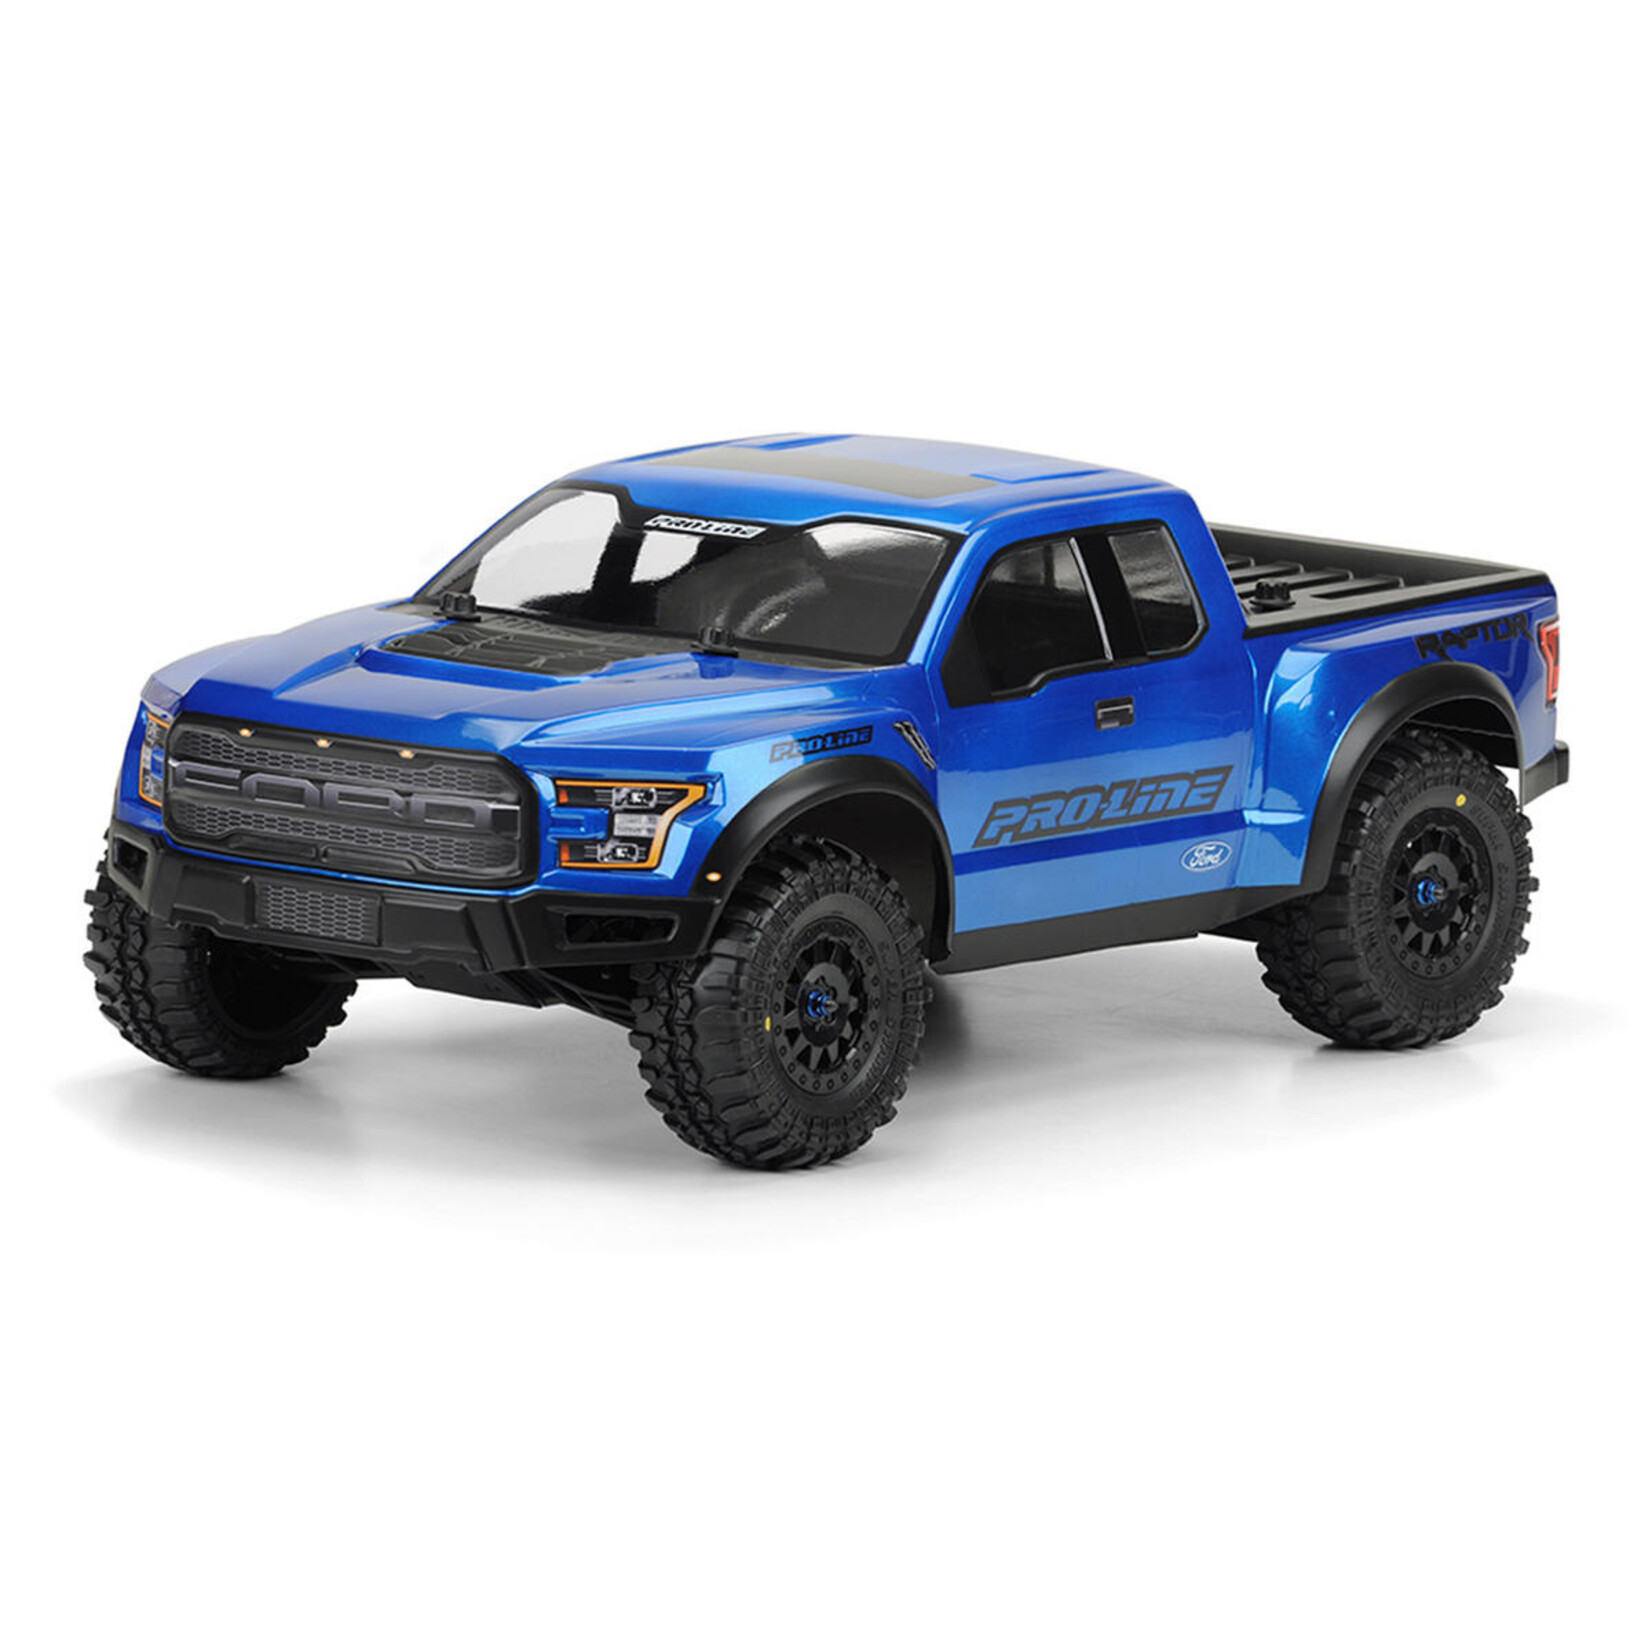 Pro-Line Pro-Line True Scale 2017 Ford F-150 Body (Clear) #3461-00